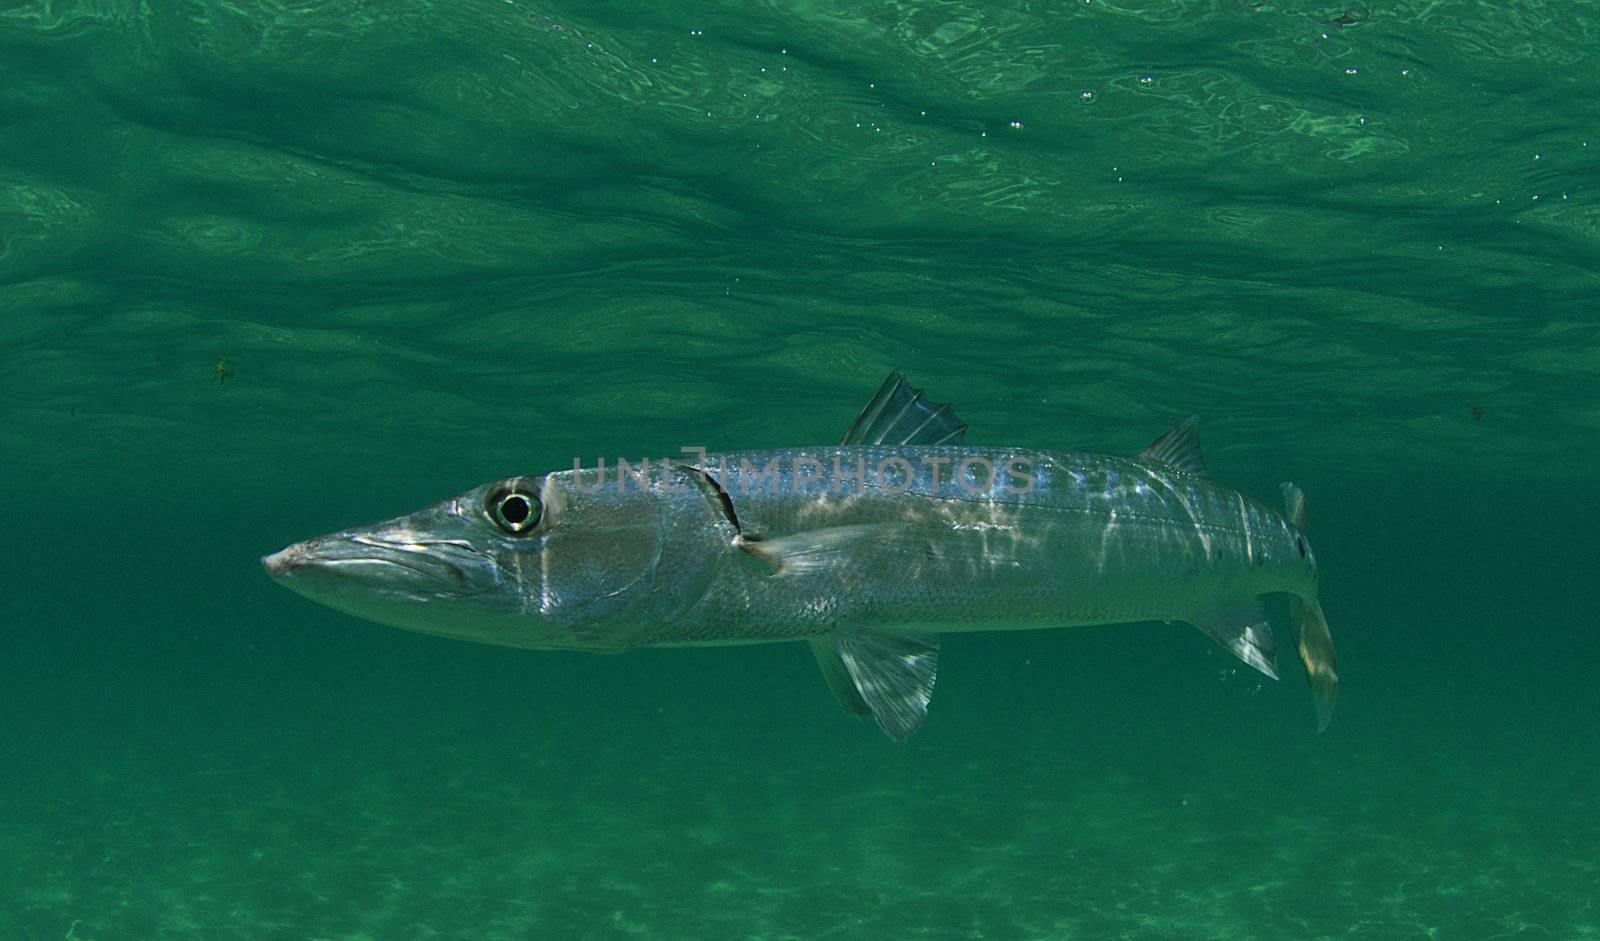 In its natural habitat, a barracuda is swimming in ocean 